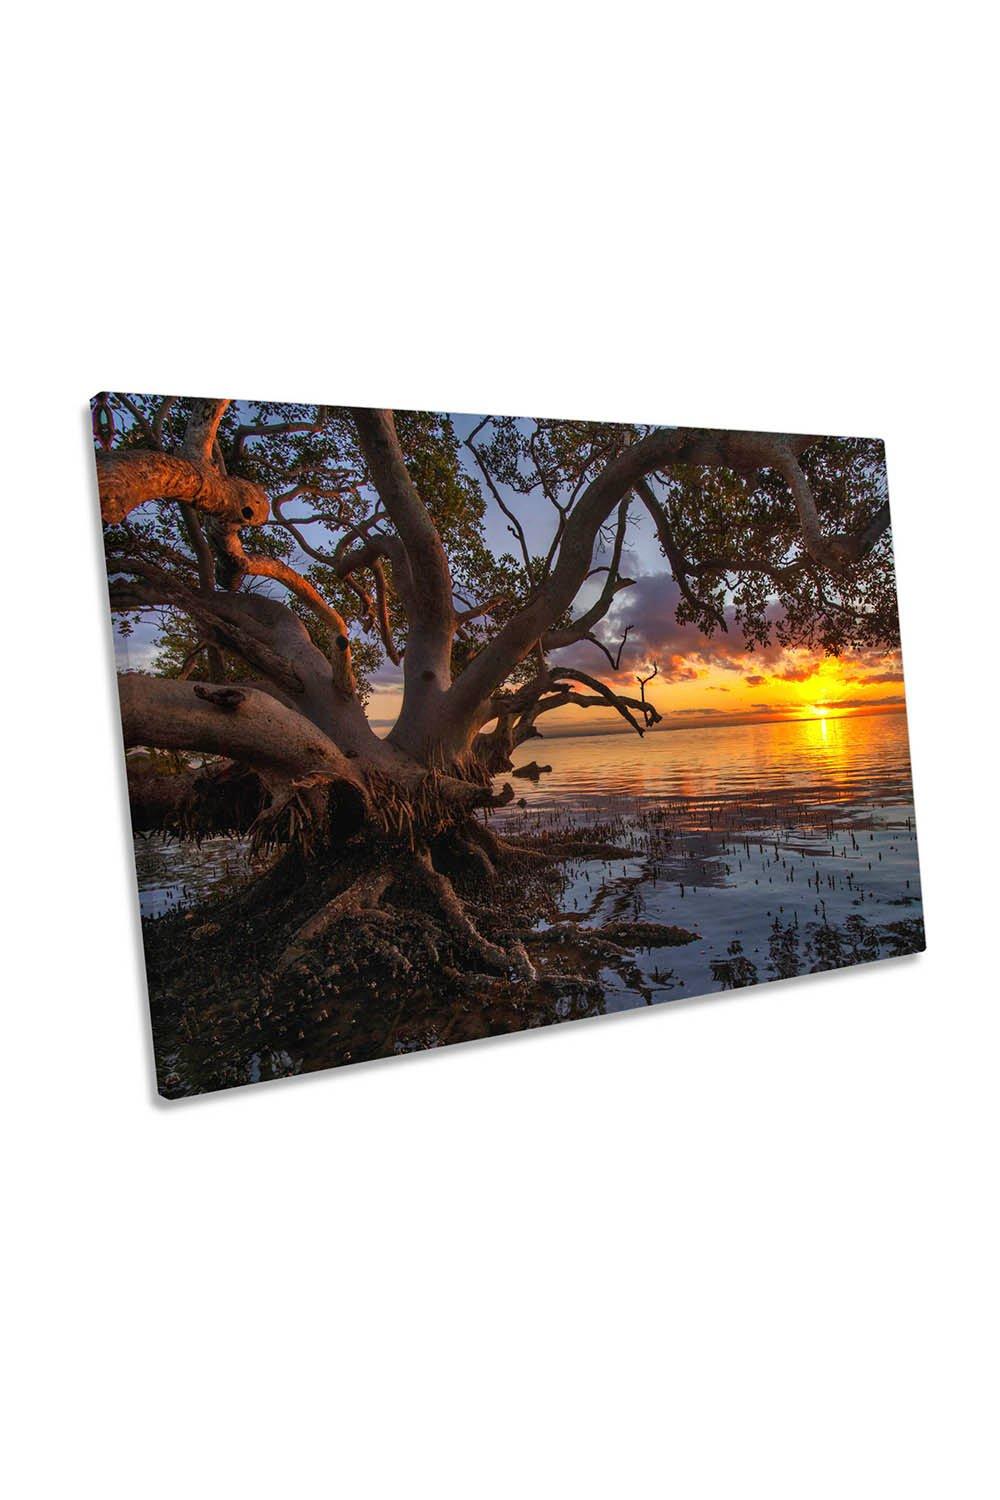 Sunrise at Nudgee Beach Queensland Canvas Wall Art Picture Print